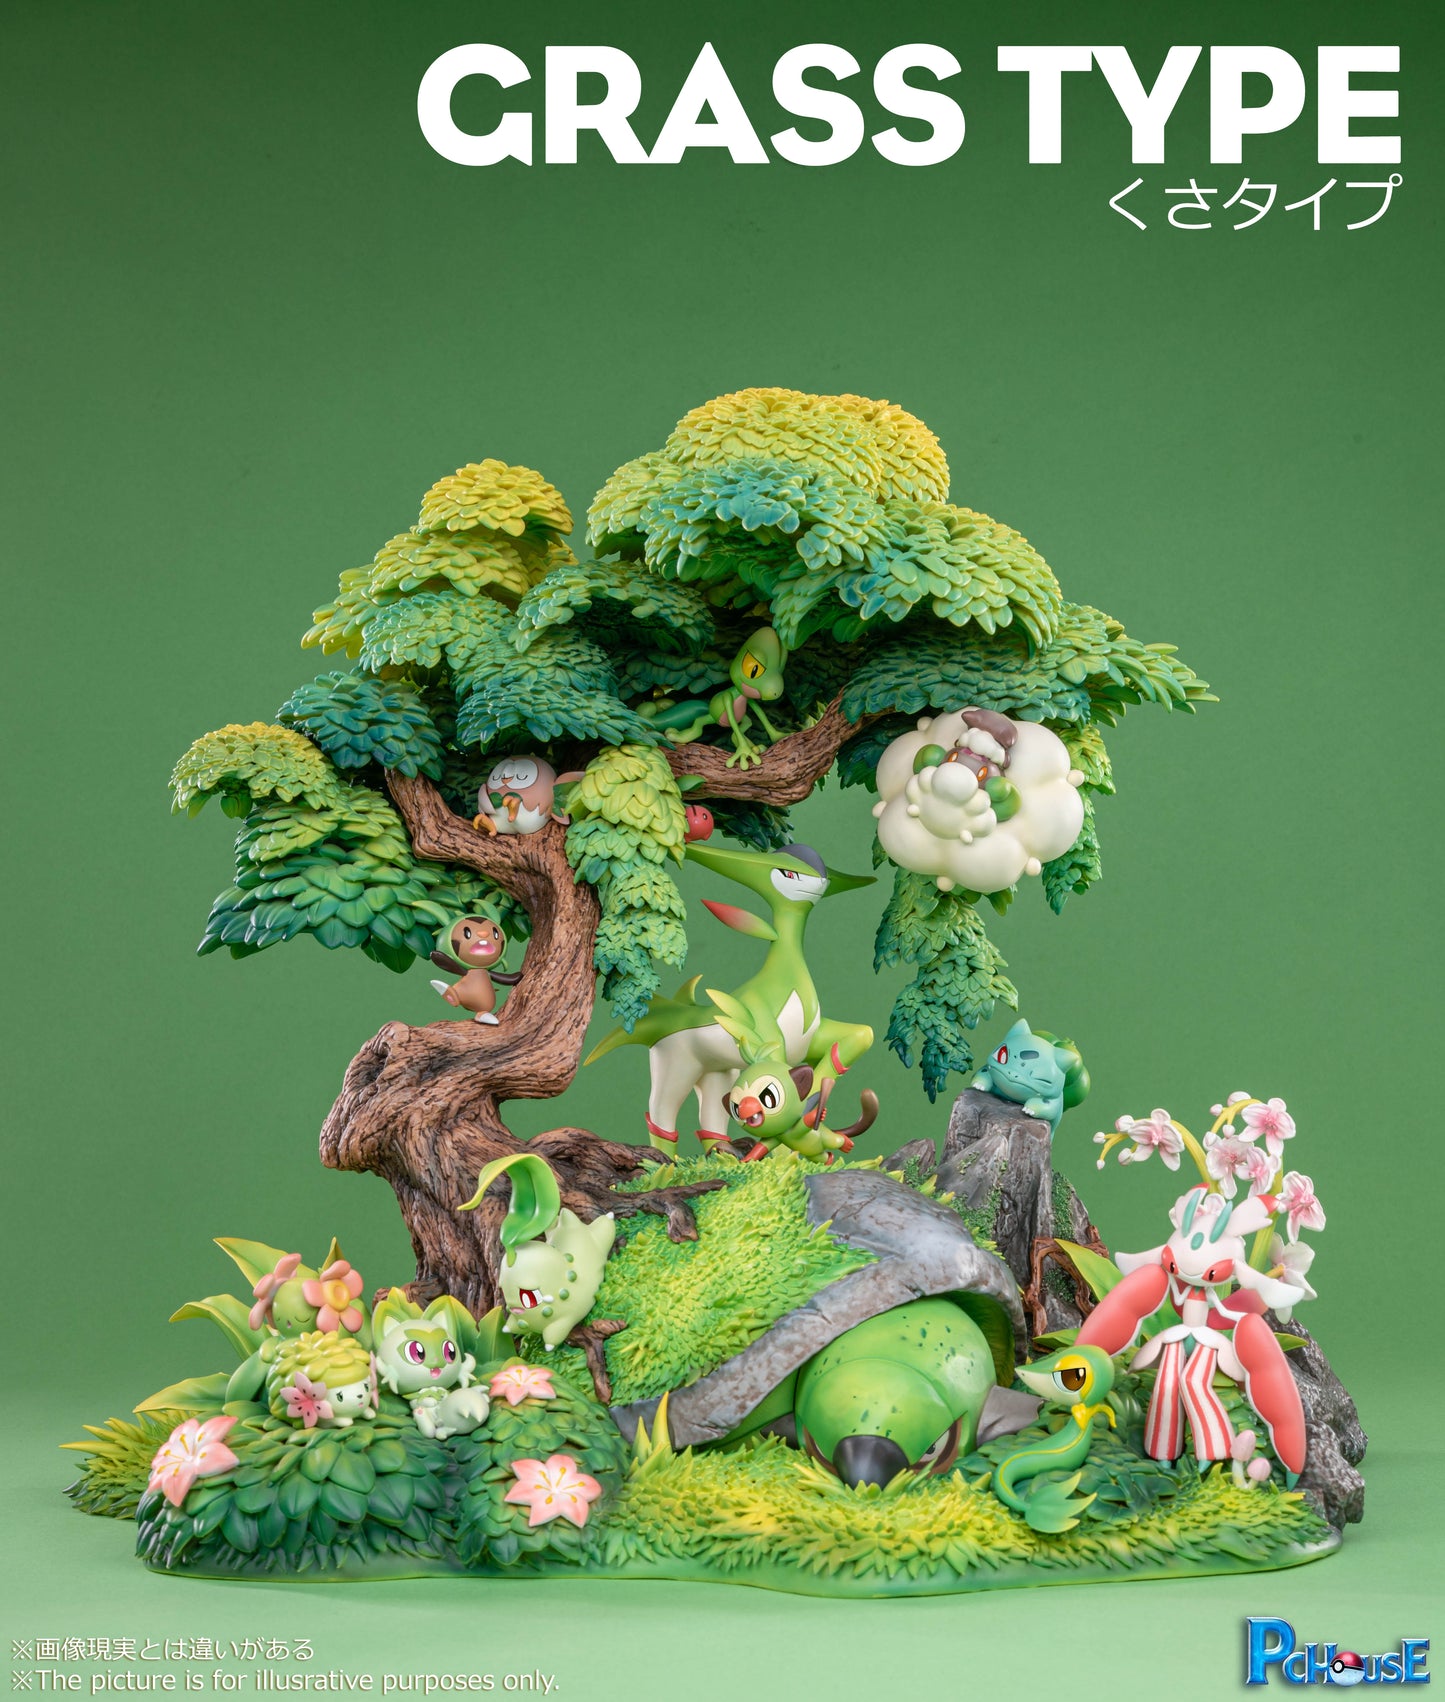 〖Sold Out〗Pokemon Type Series 03 Grass-type Model Statue Resin - PC House Studio